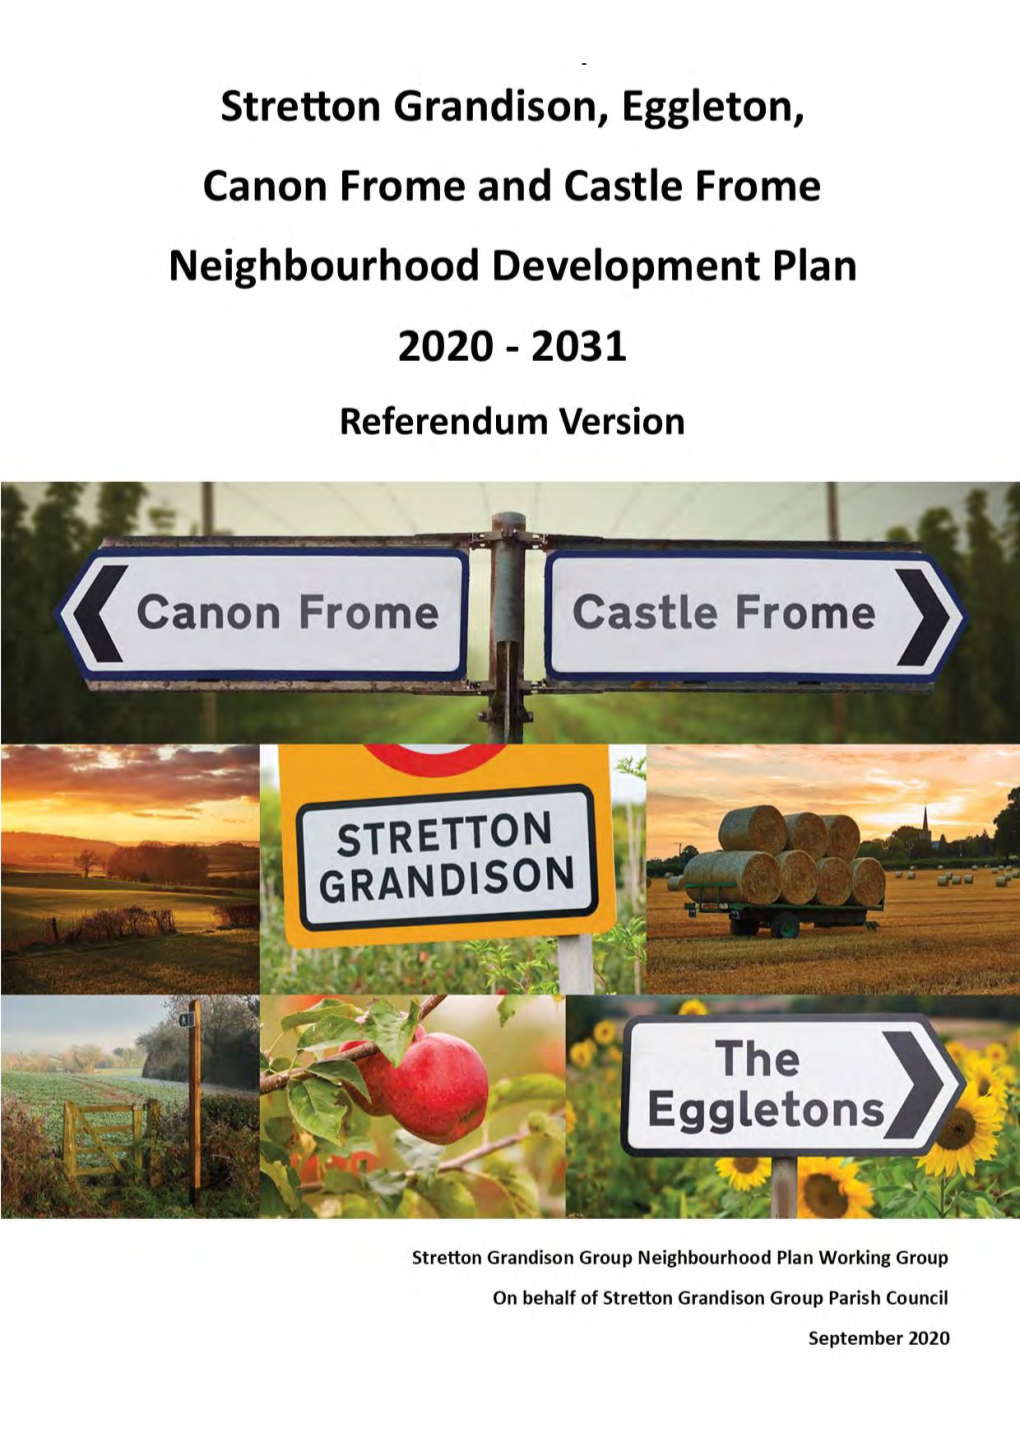 Stretton Grandison Group Neighbourhood Development Plan Meets the Basic Conditions and Should Proceed to Referendum in the Group Parish